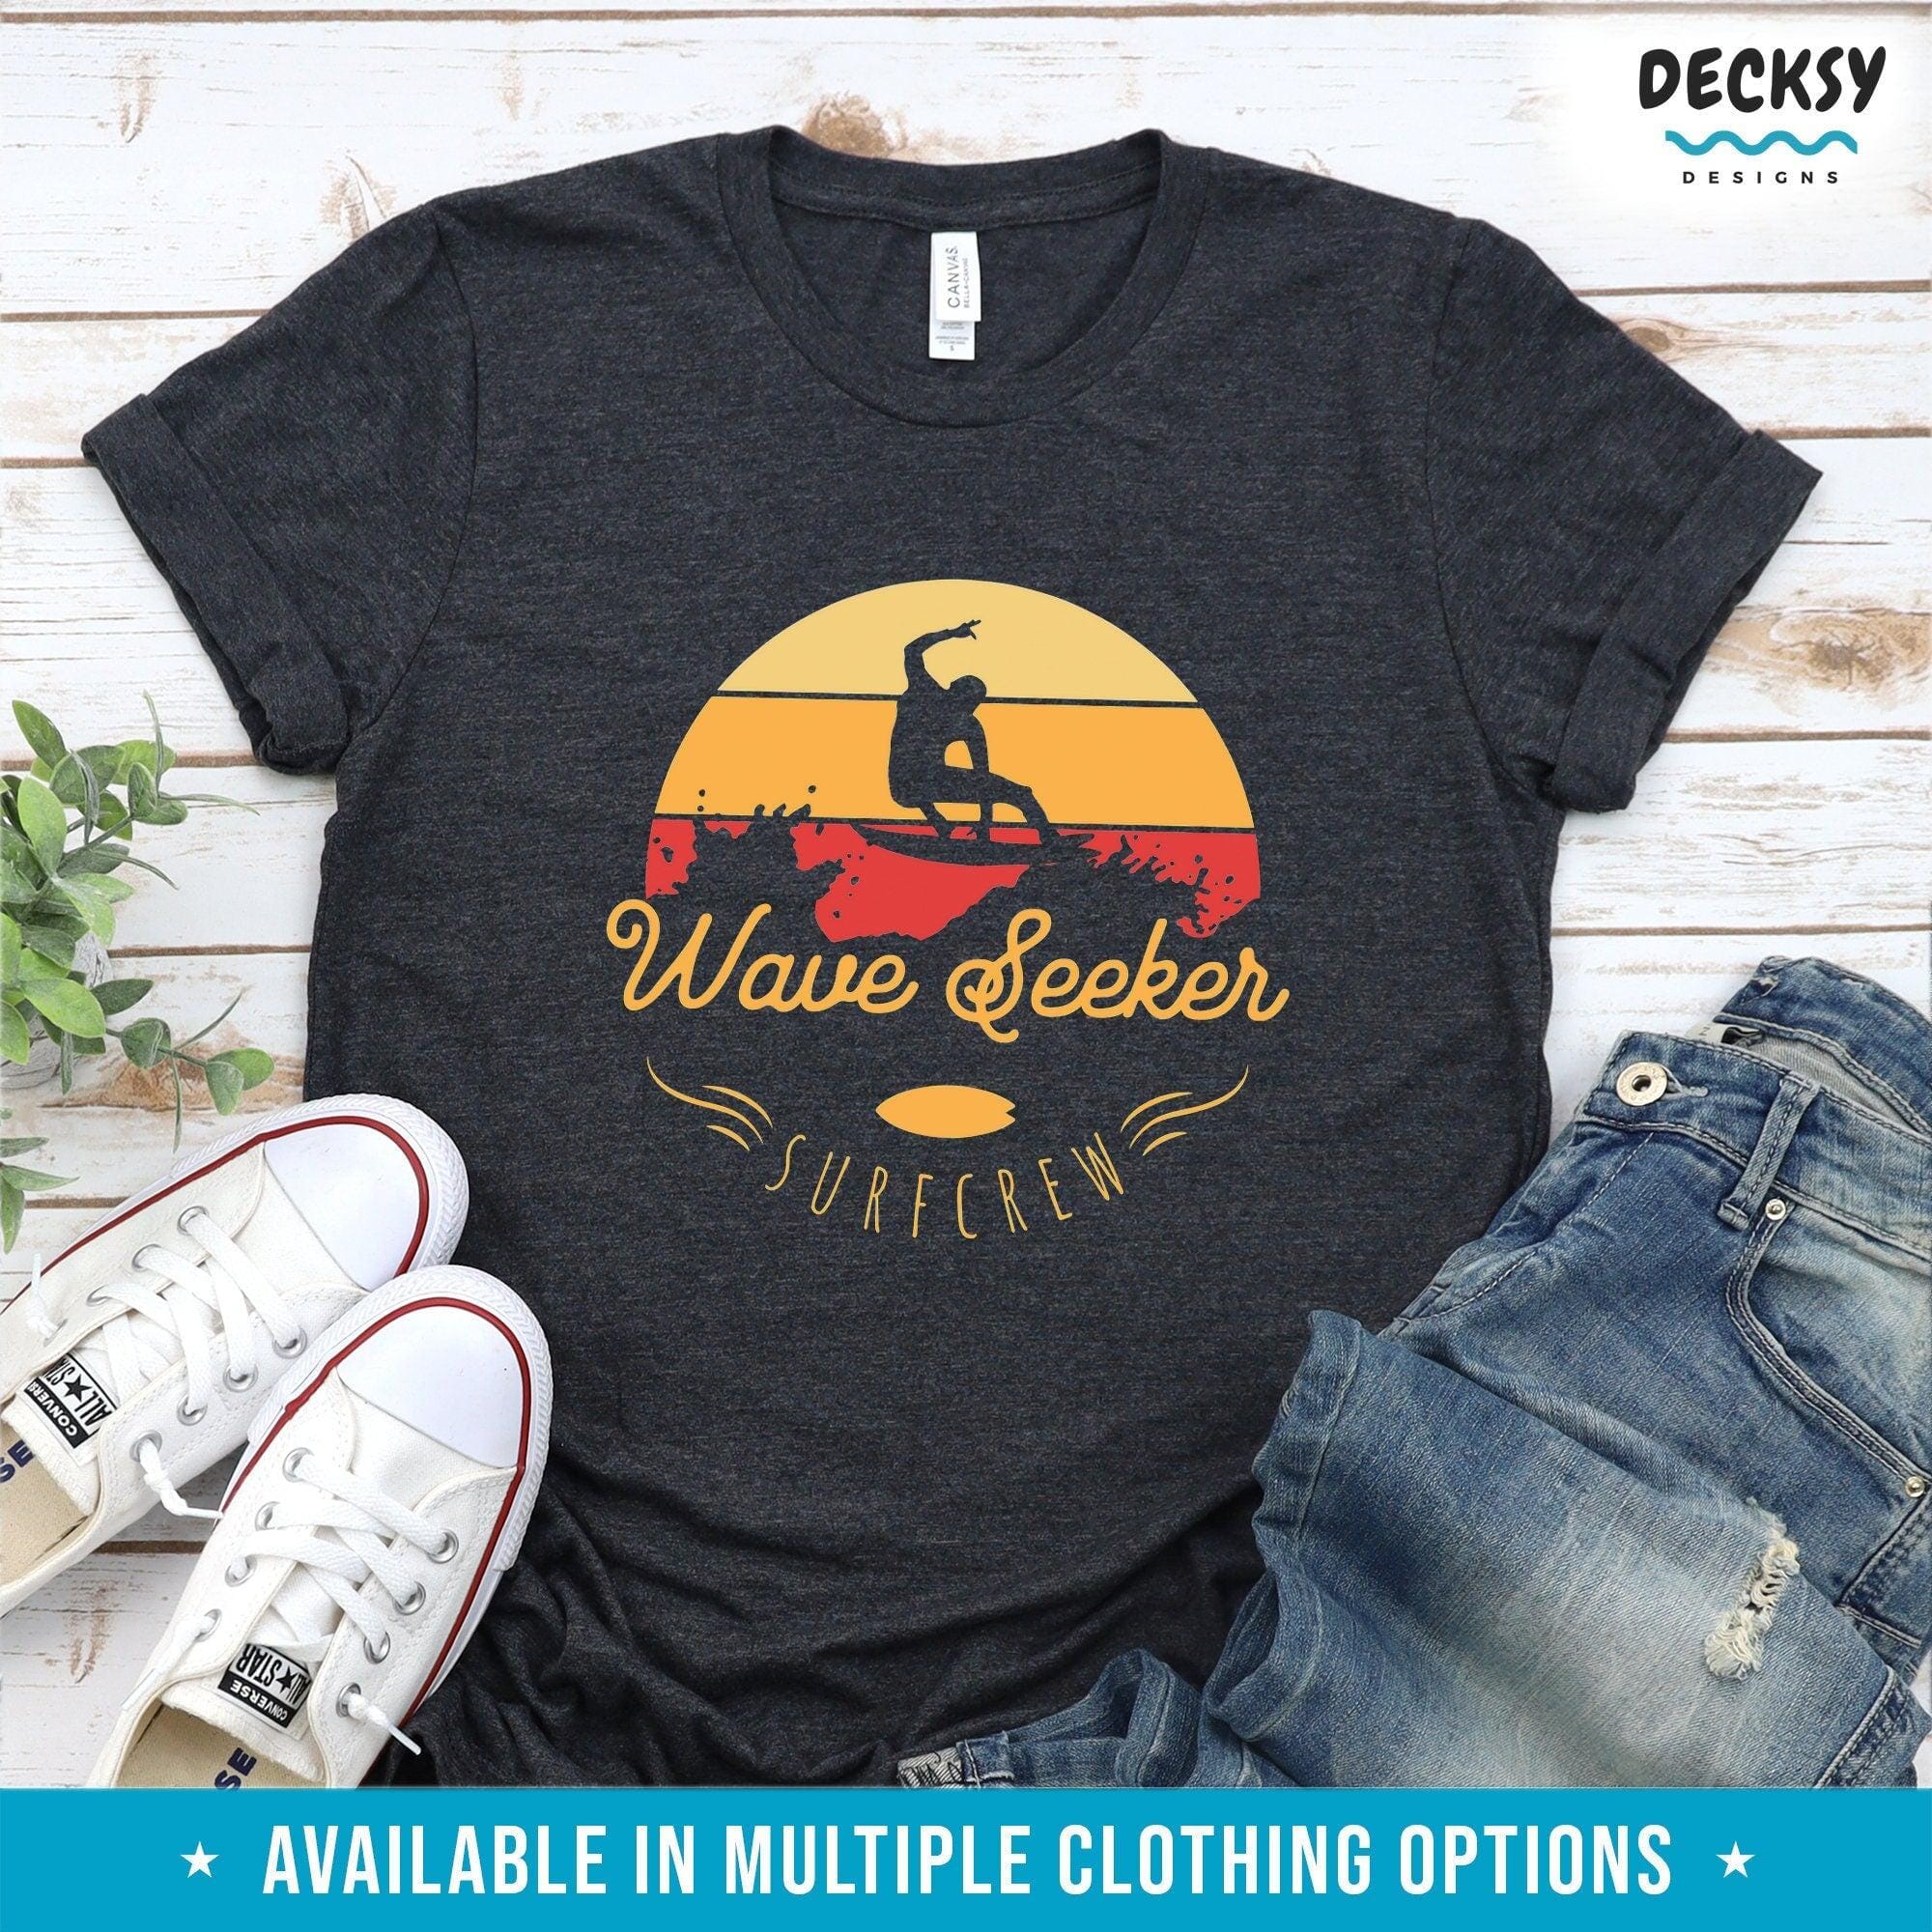 Surfing T-shirt, Gift For Surfer-Clothing:Gender-Neutral Adult Clothing:Tops & Tees:T-shirts:Graphic Tees-DecksyDesigns